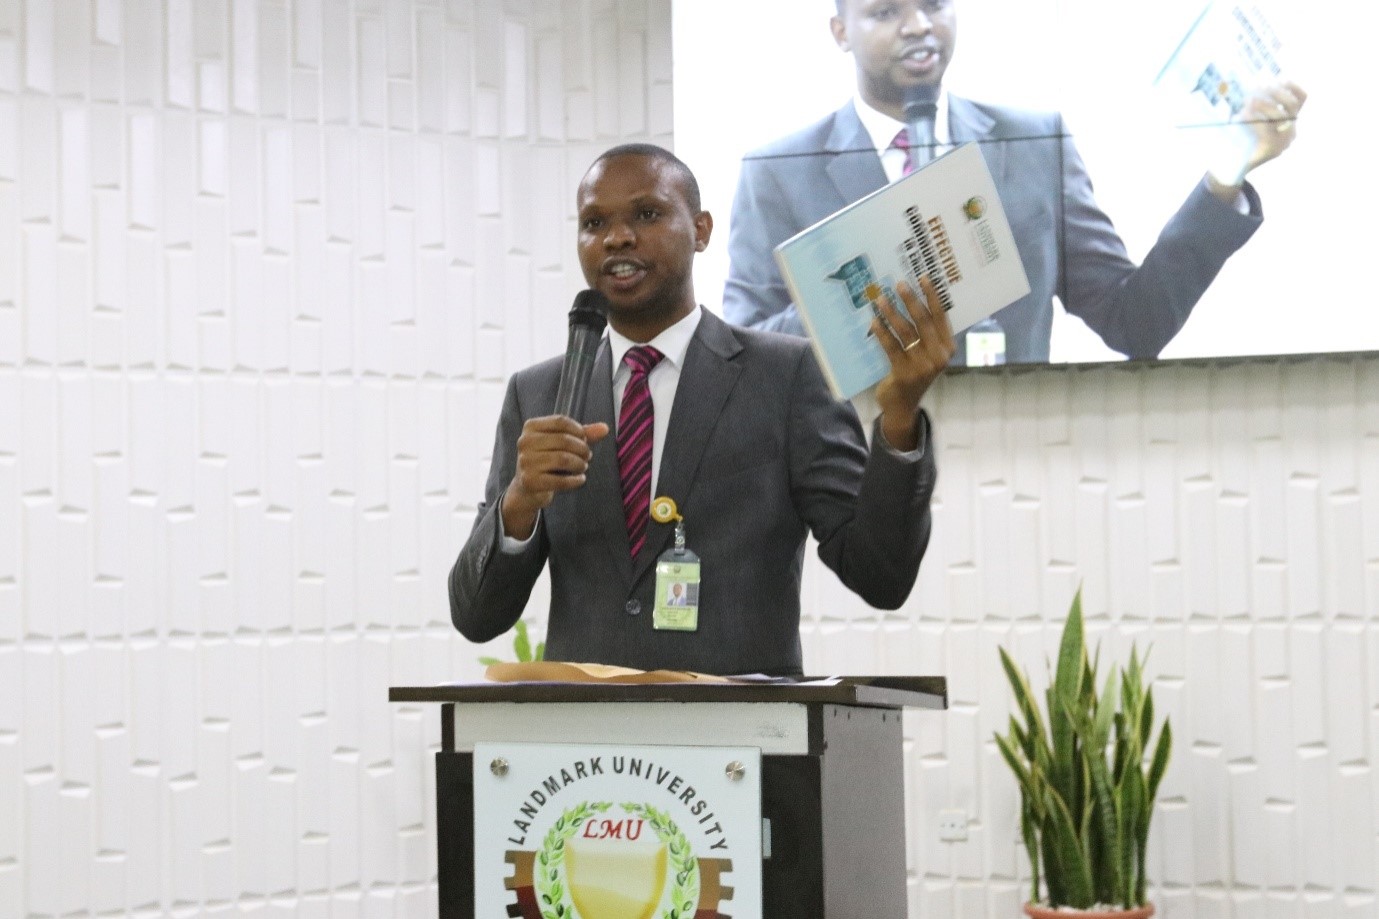 The Registrar, Dr Azubuike Ezenwoke introducing the University publication packaged by the University Wide Courses (UWC) titled, Effective Communication in English Language during Announcement at the 2017/2018 Academic Session Omega Semester Staff Welcome Assembly